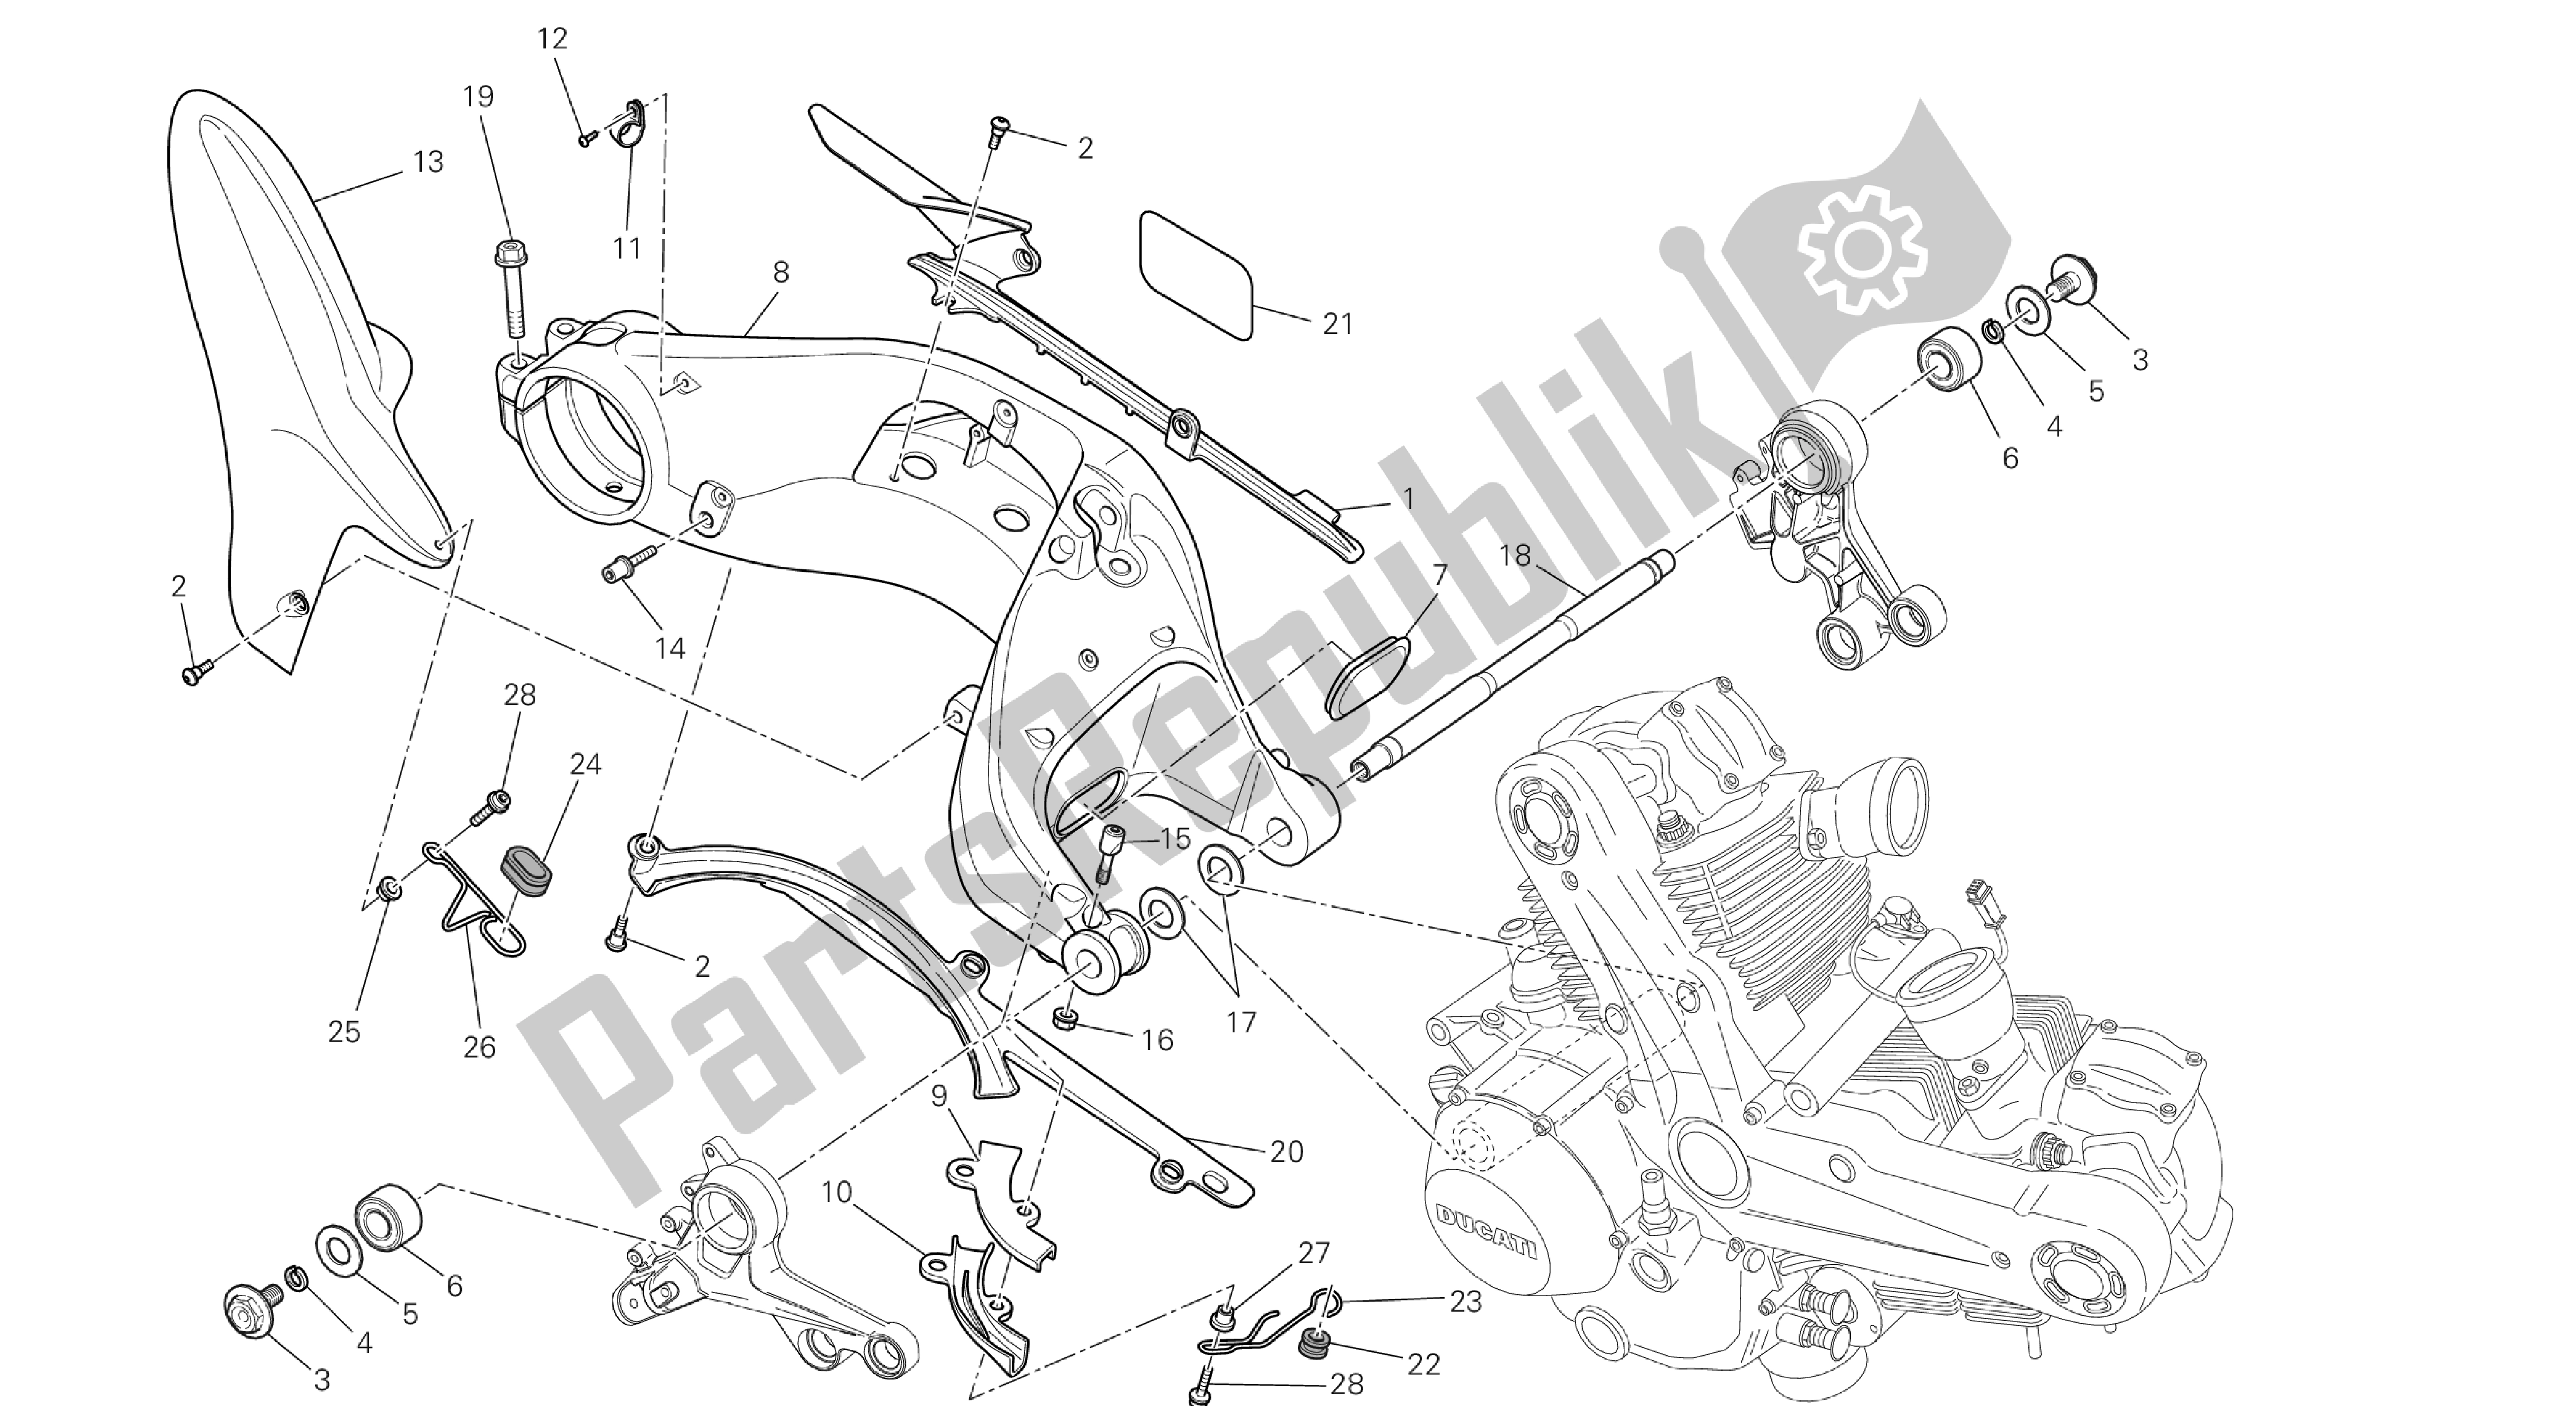 All parts for the Drawing 032 - Swing Arm [mod:m1100dsl;xst:chn] Group Fr Ame of the Ducati Monster 1100 2013